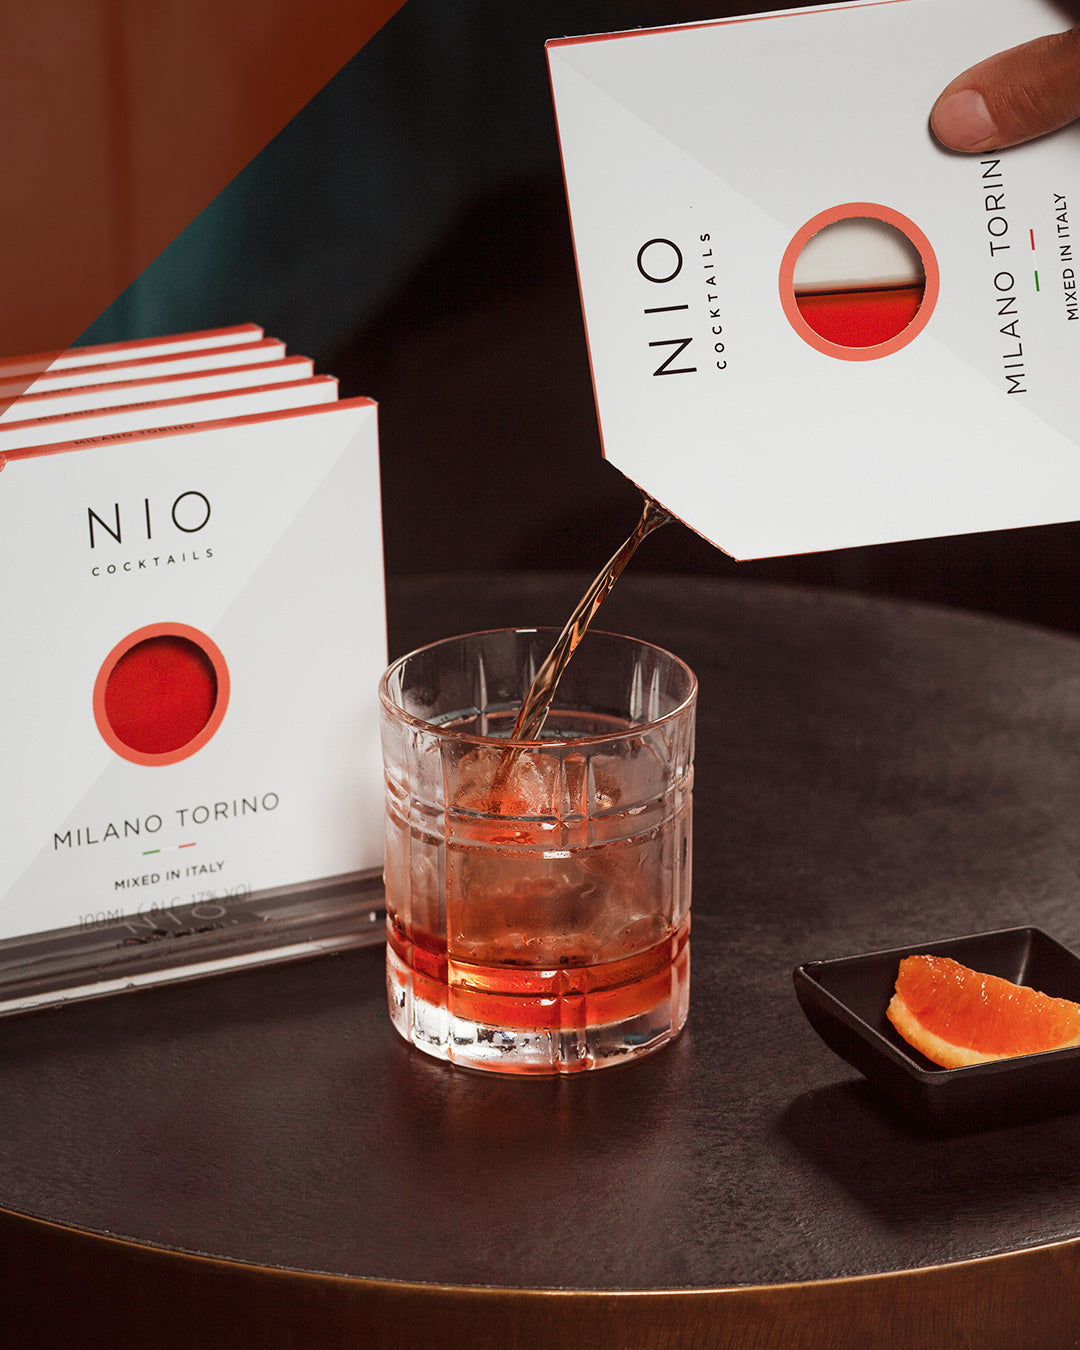 Holidays Cocktails Menù: the Aperitif by NIO Cocktails.